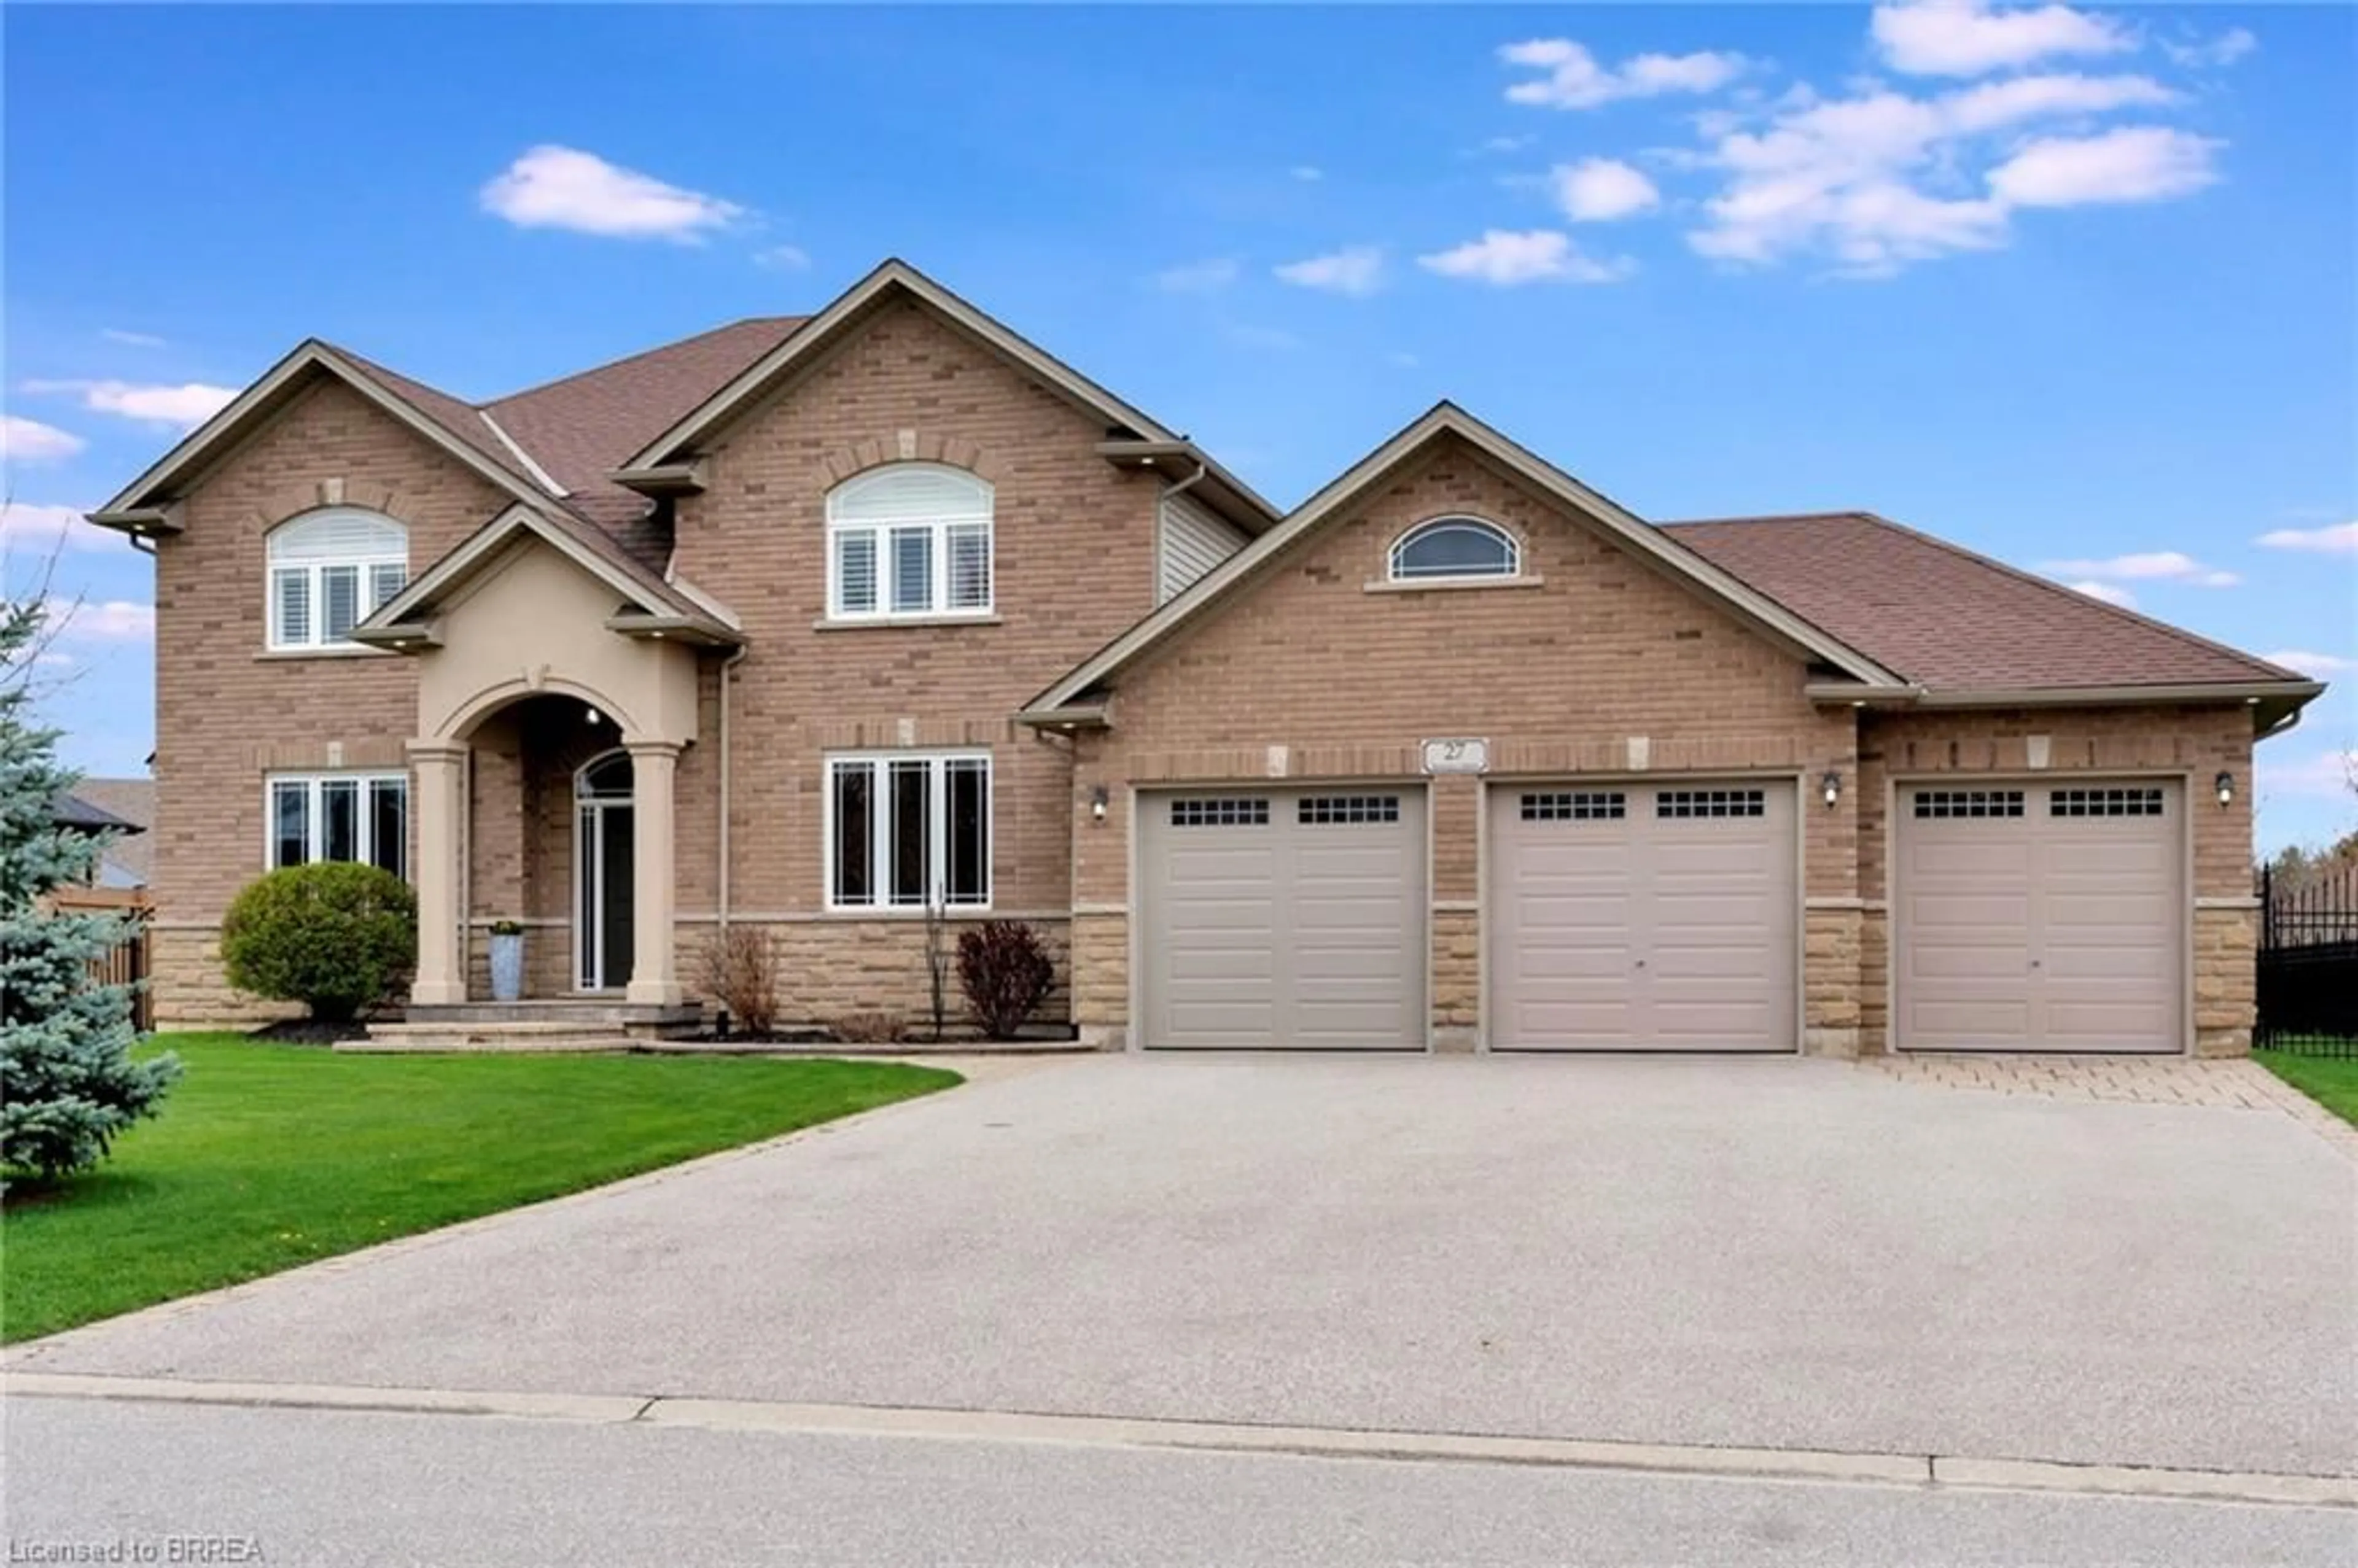 Home with brick exterior material for 27 Pinehill Dr, Brantford Ontario N3T 0L9